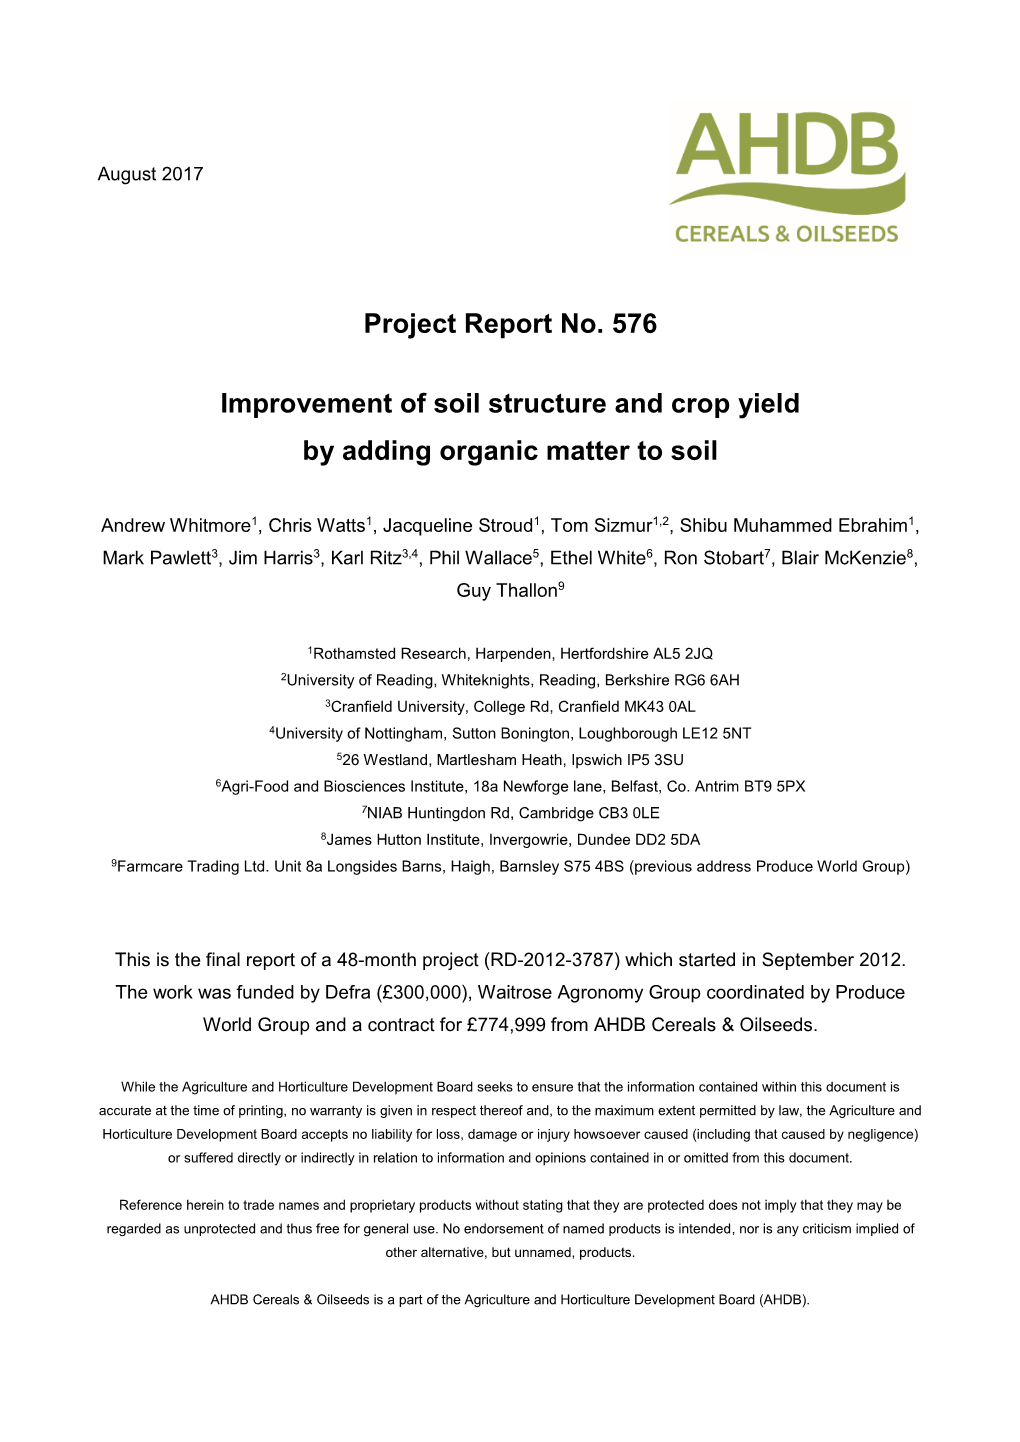 Project Report No. 576 Improvement of Soil Structure and Crop Yield by Adding Organic Matter to Soil